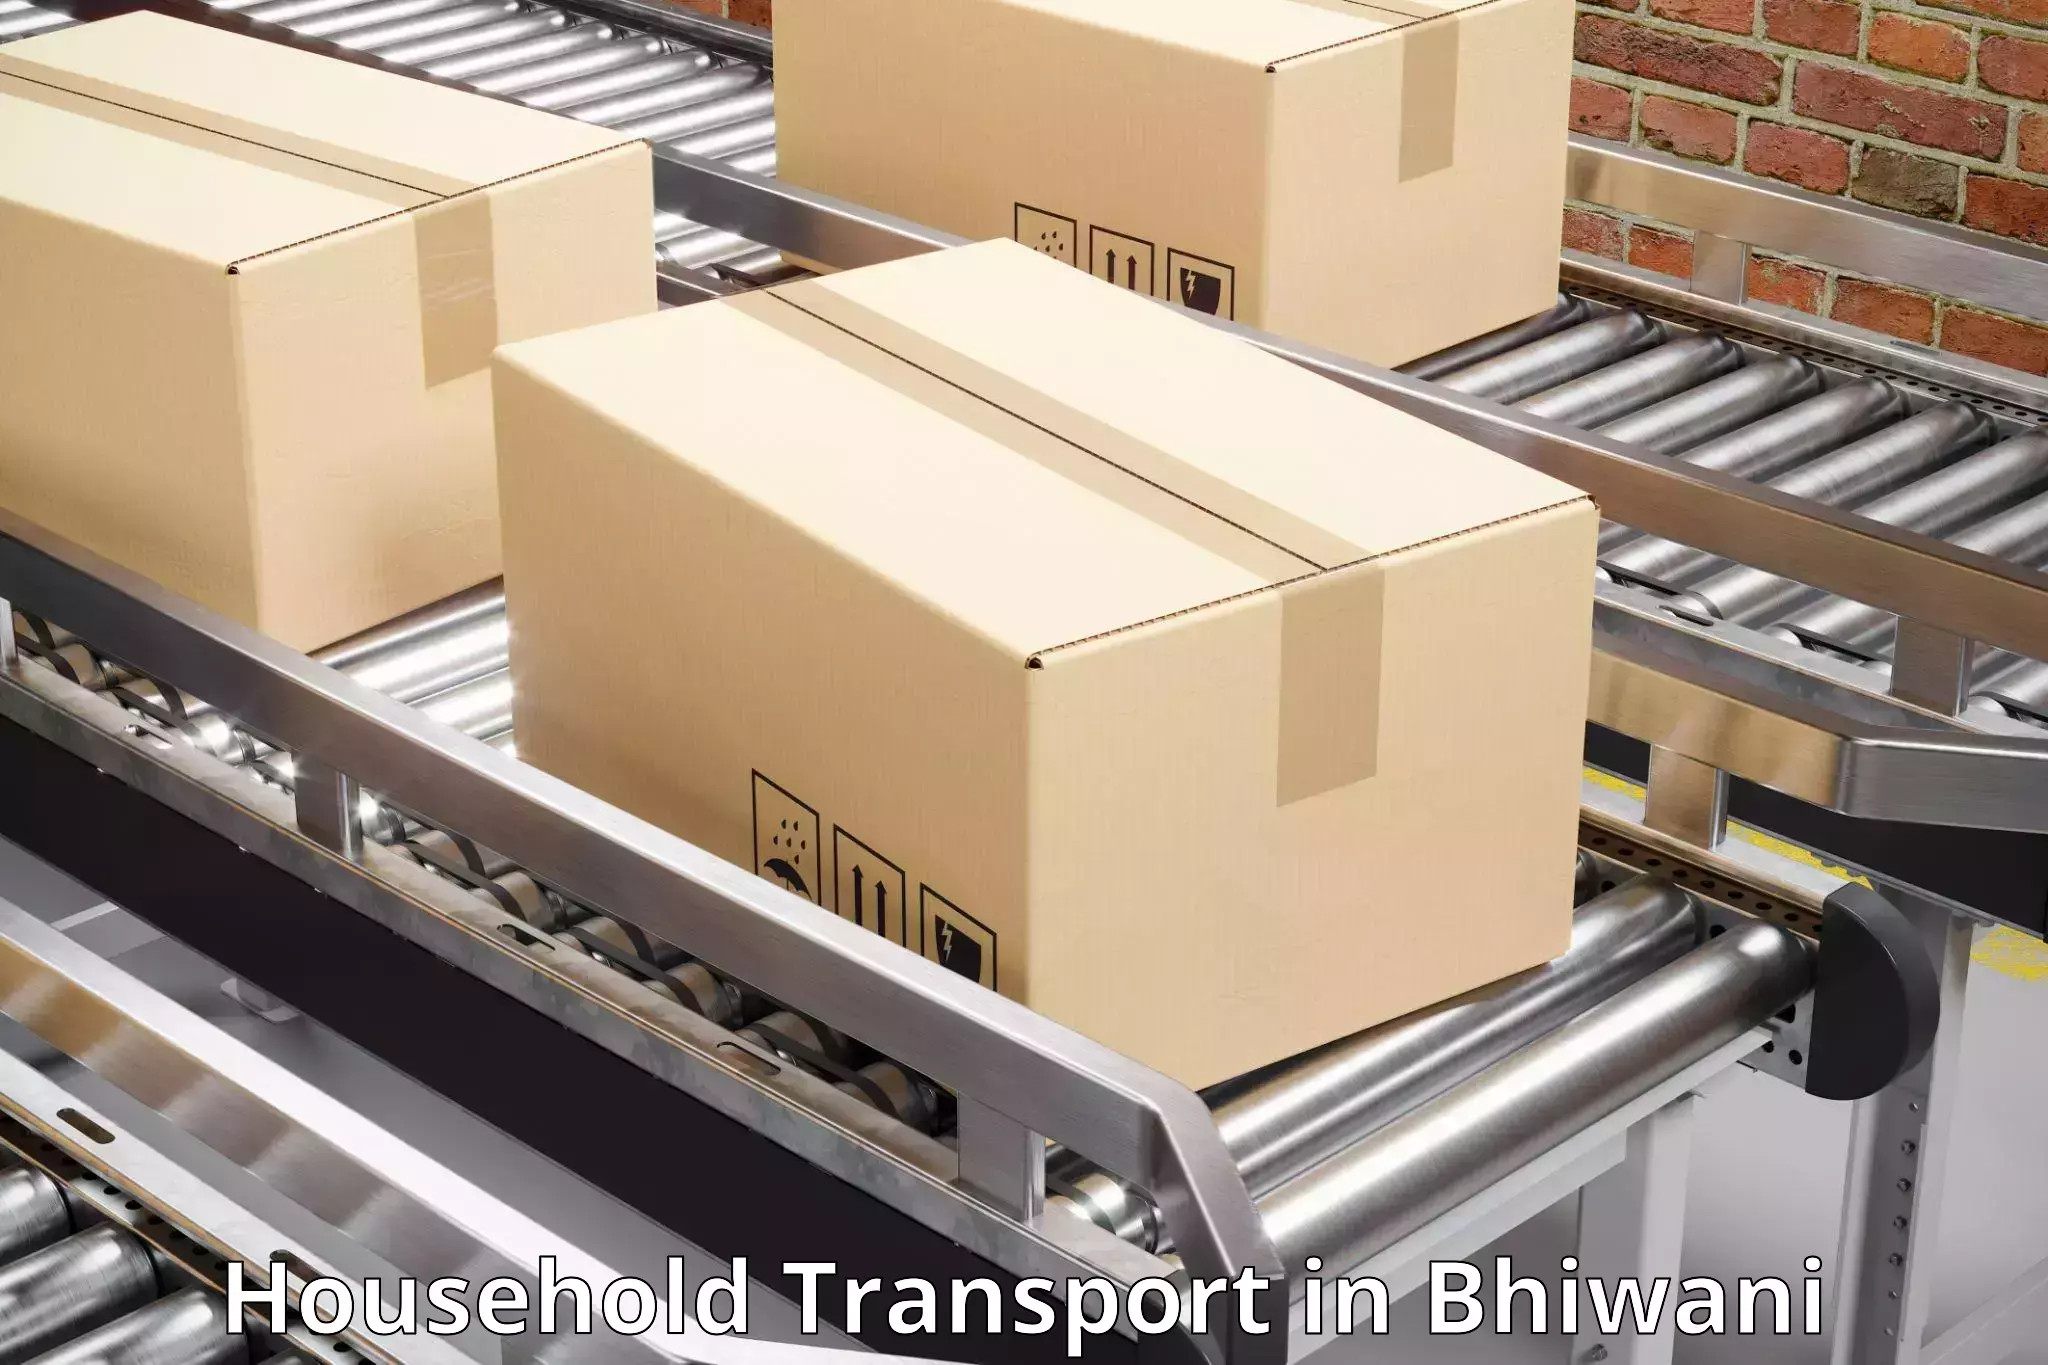 Household goods transport service in Bhiwani